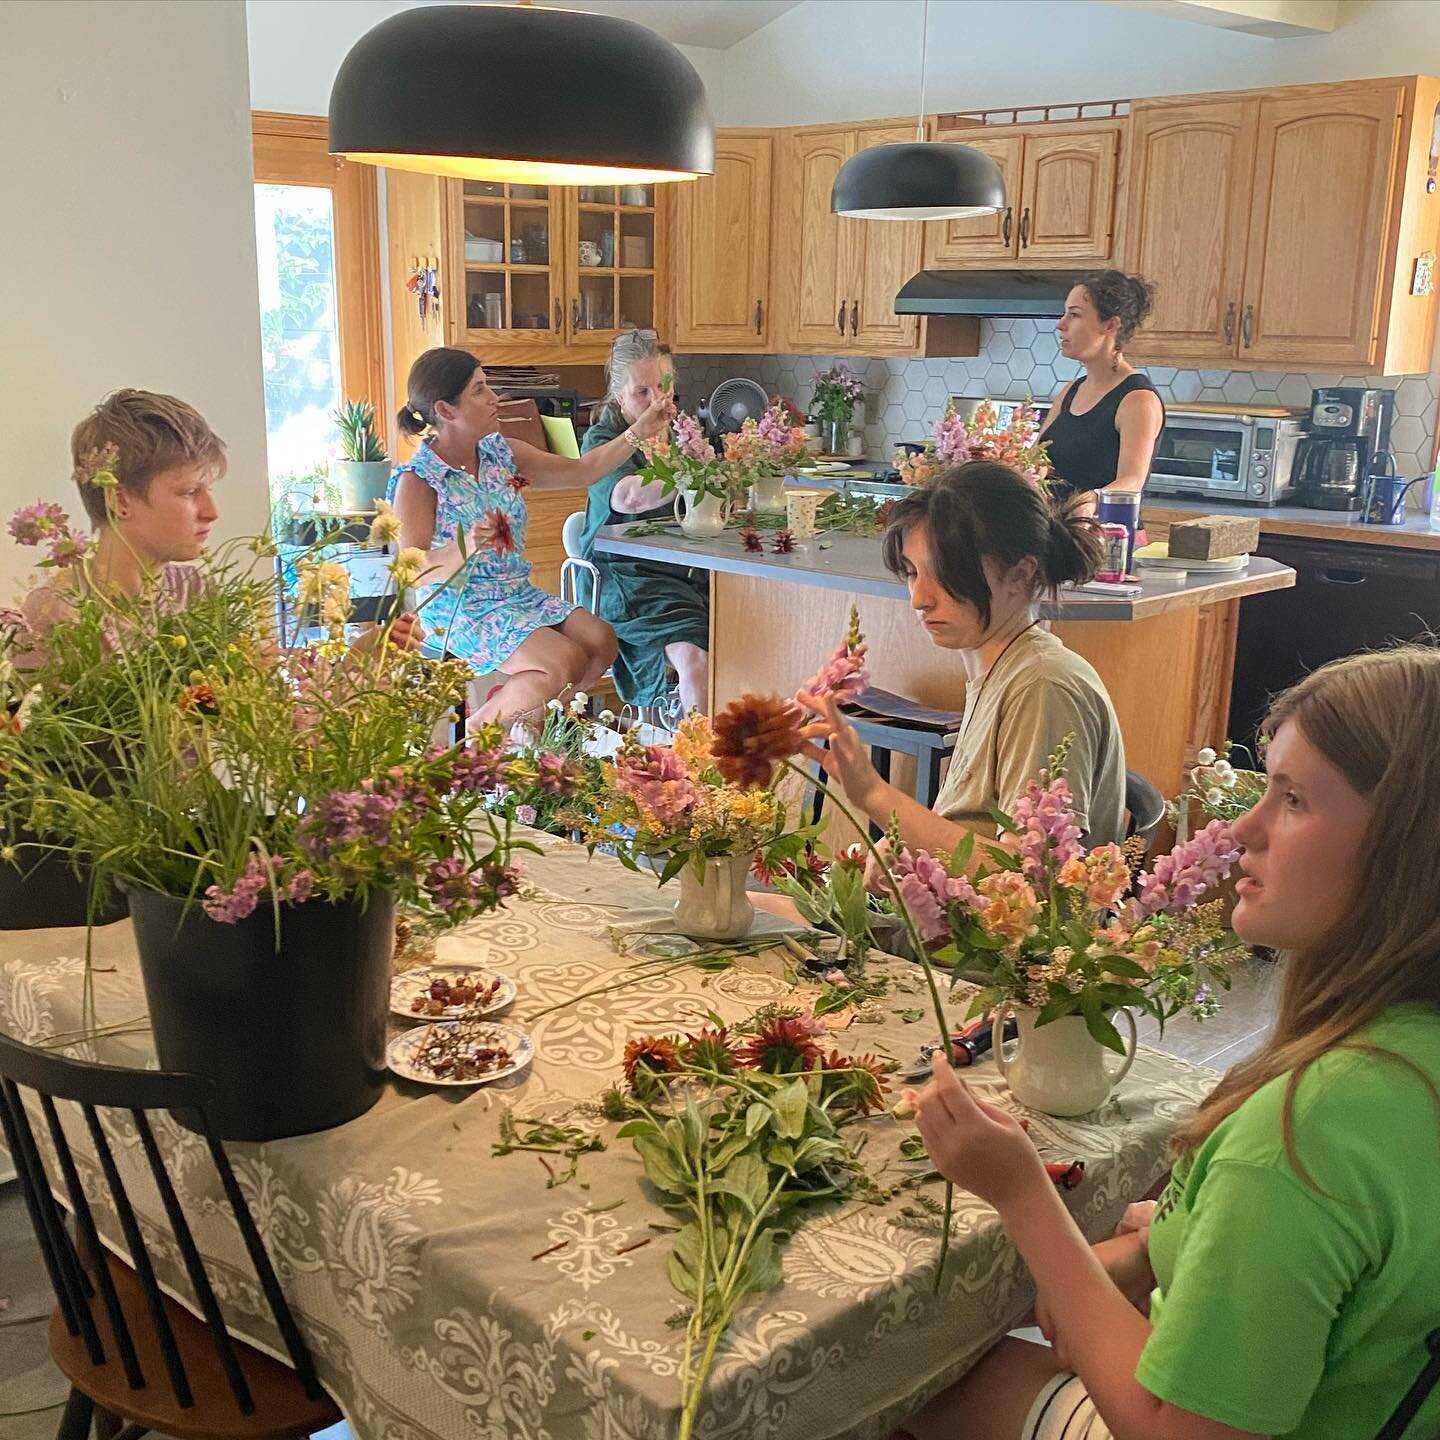 Britt and I put on Posy&rsquo;s very first private floral arranging workshop today and we absolutely loved it! Flowering in another person&rsquo;s home is so much fun and this crew was totally fabulous AND florally gifted!! We are so grateful to Lind